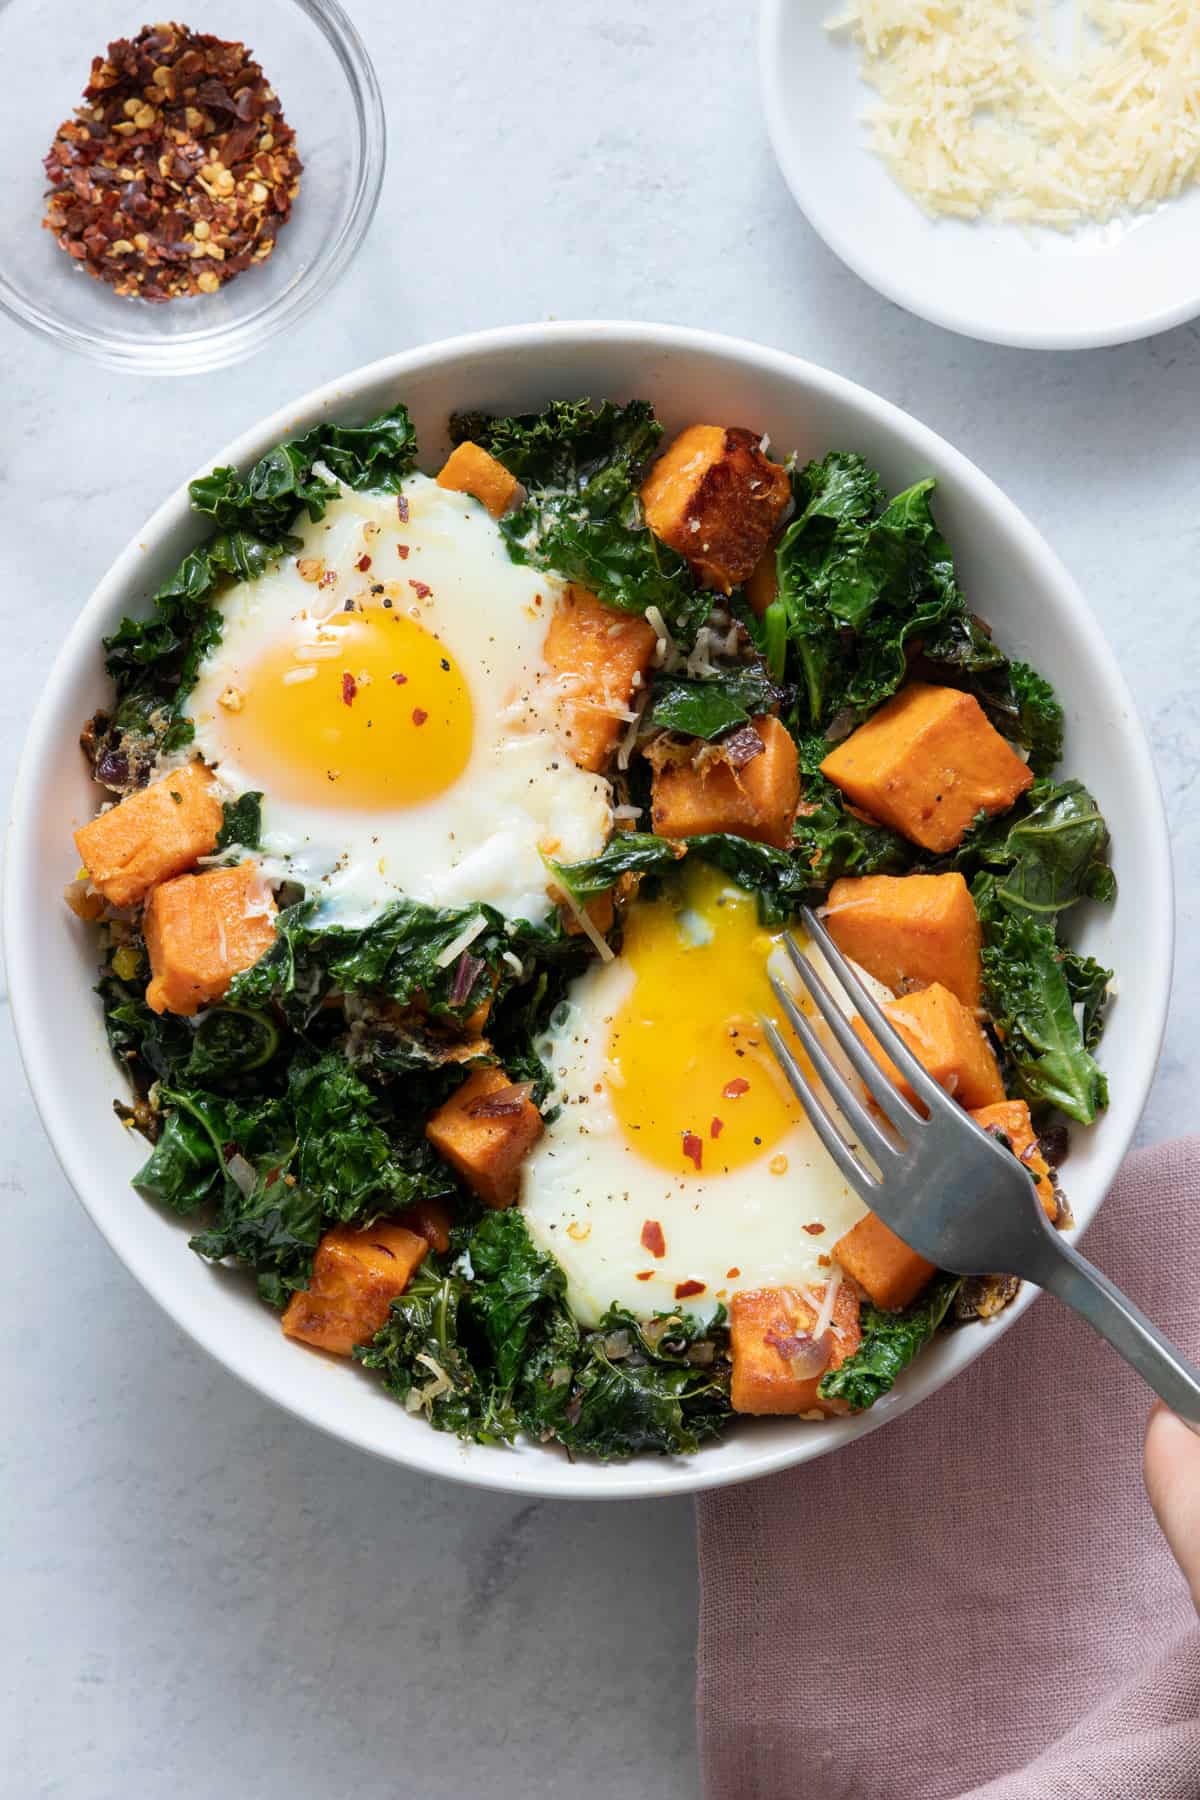  Kale & Sweet Potato Hash With Baked Eggs in a bowl